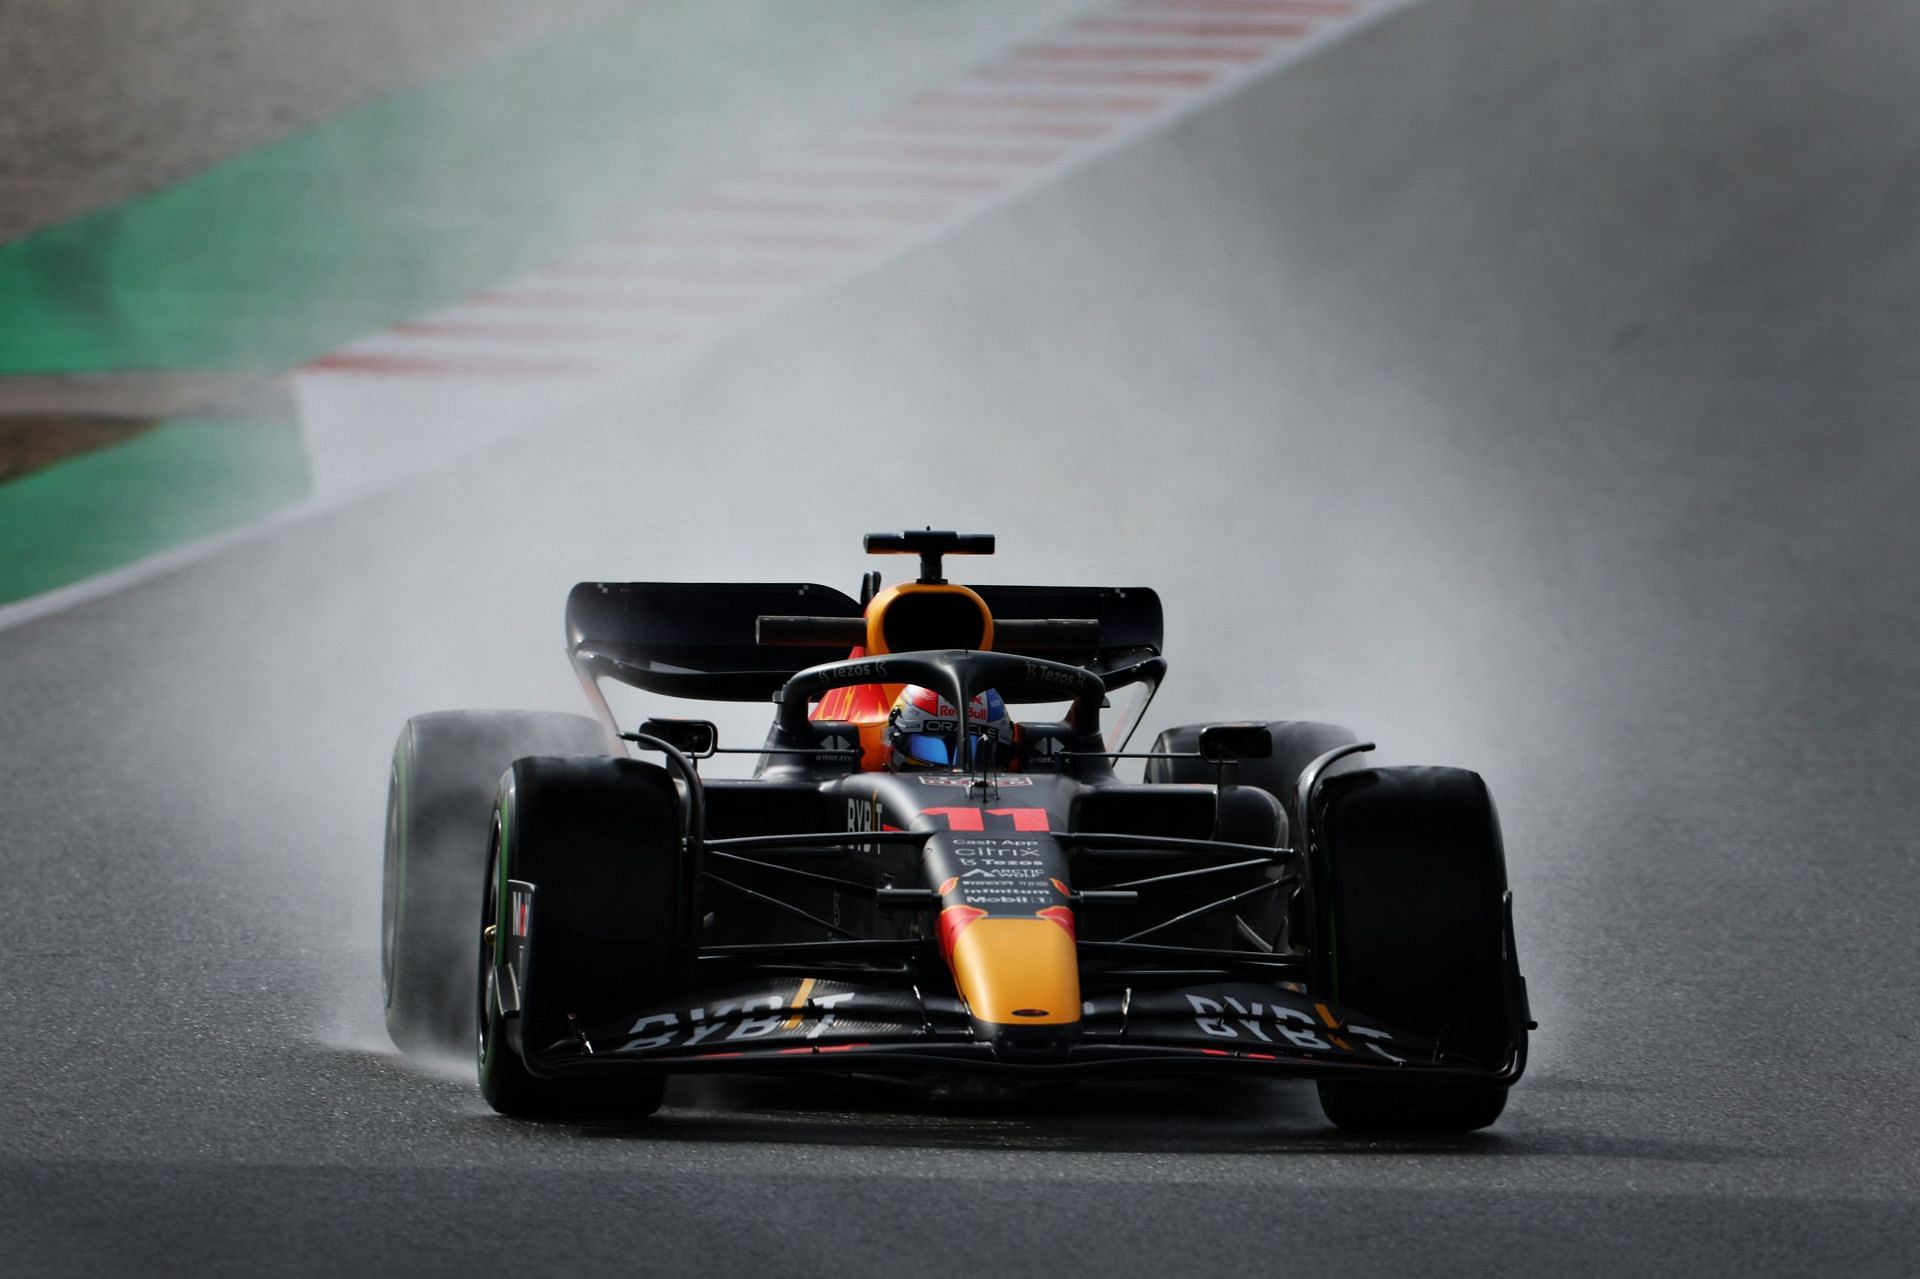 The first F1 pre-season test concluded in Barcelona last week